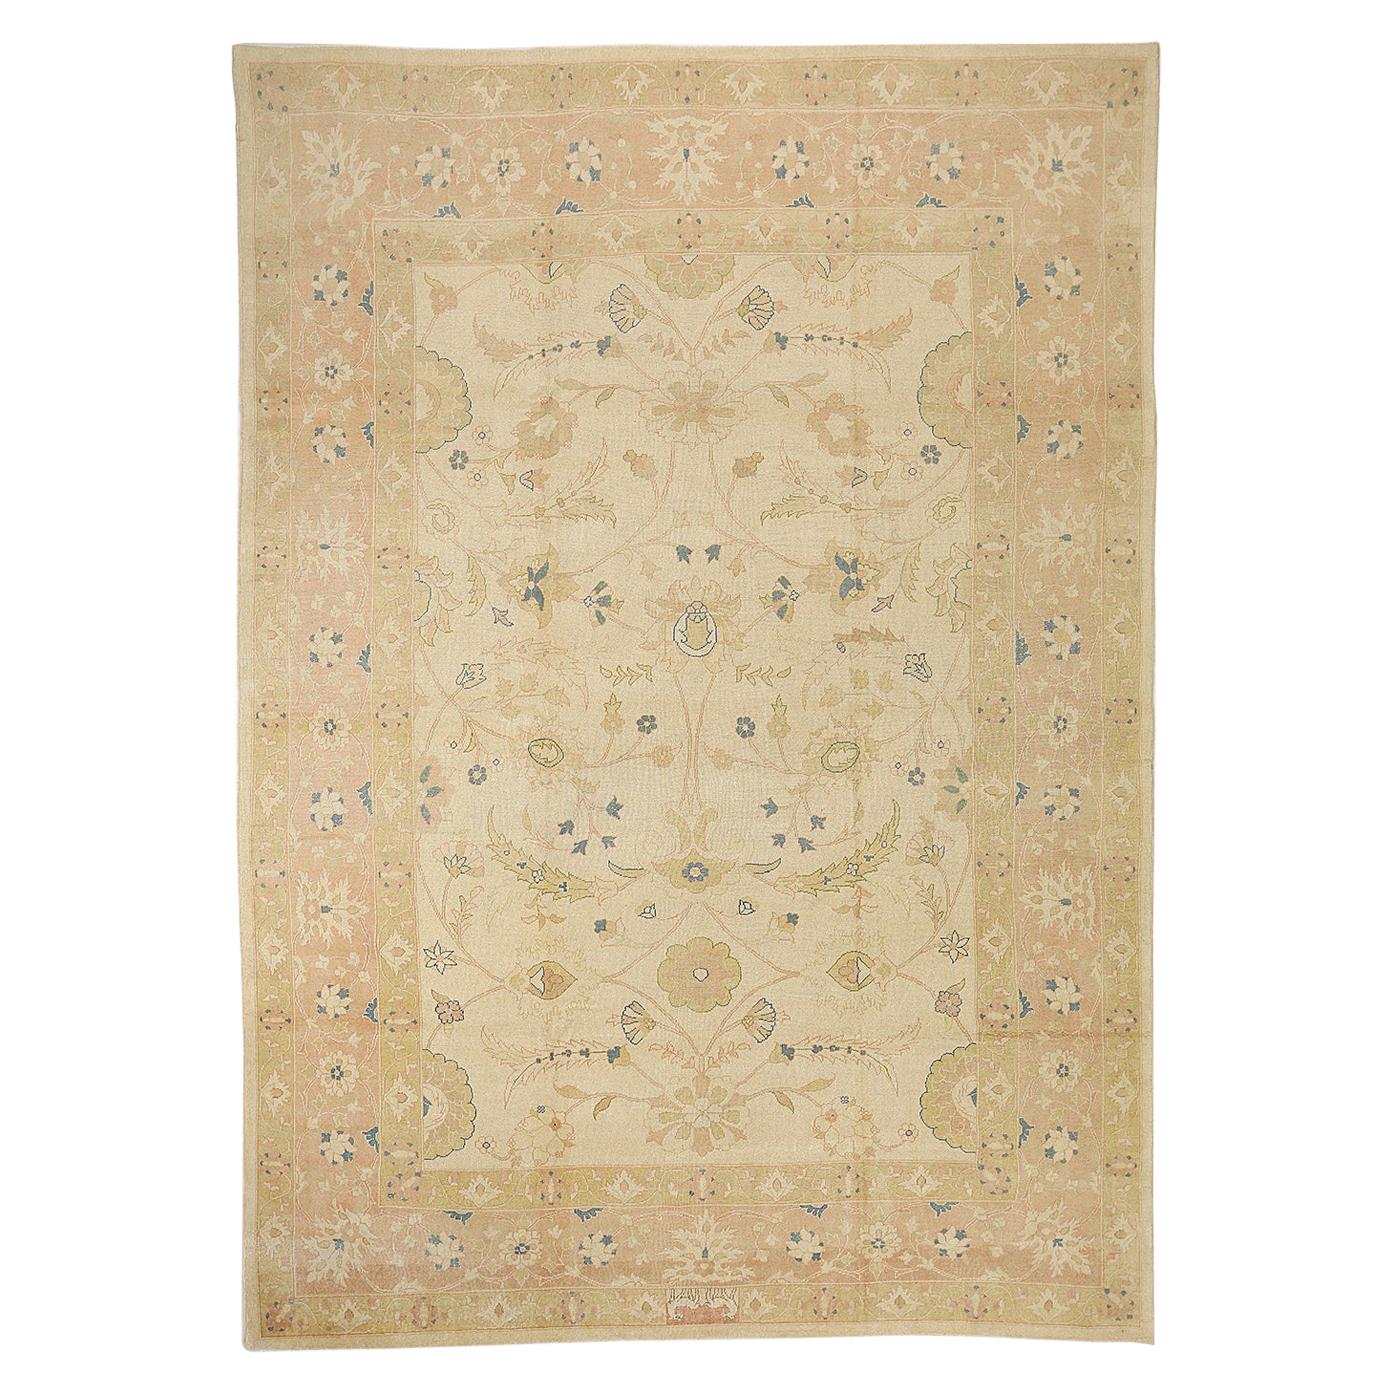 New Persian Sultanabad Rug with Blue & Beige Floral Details 